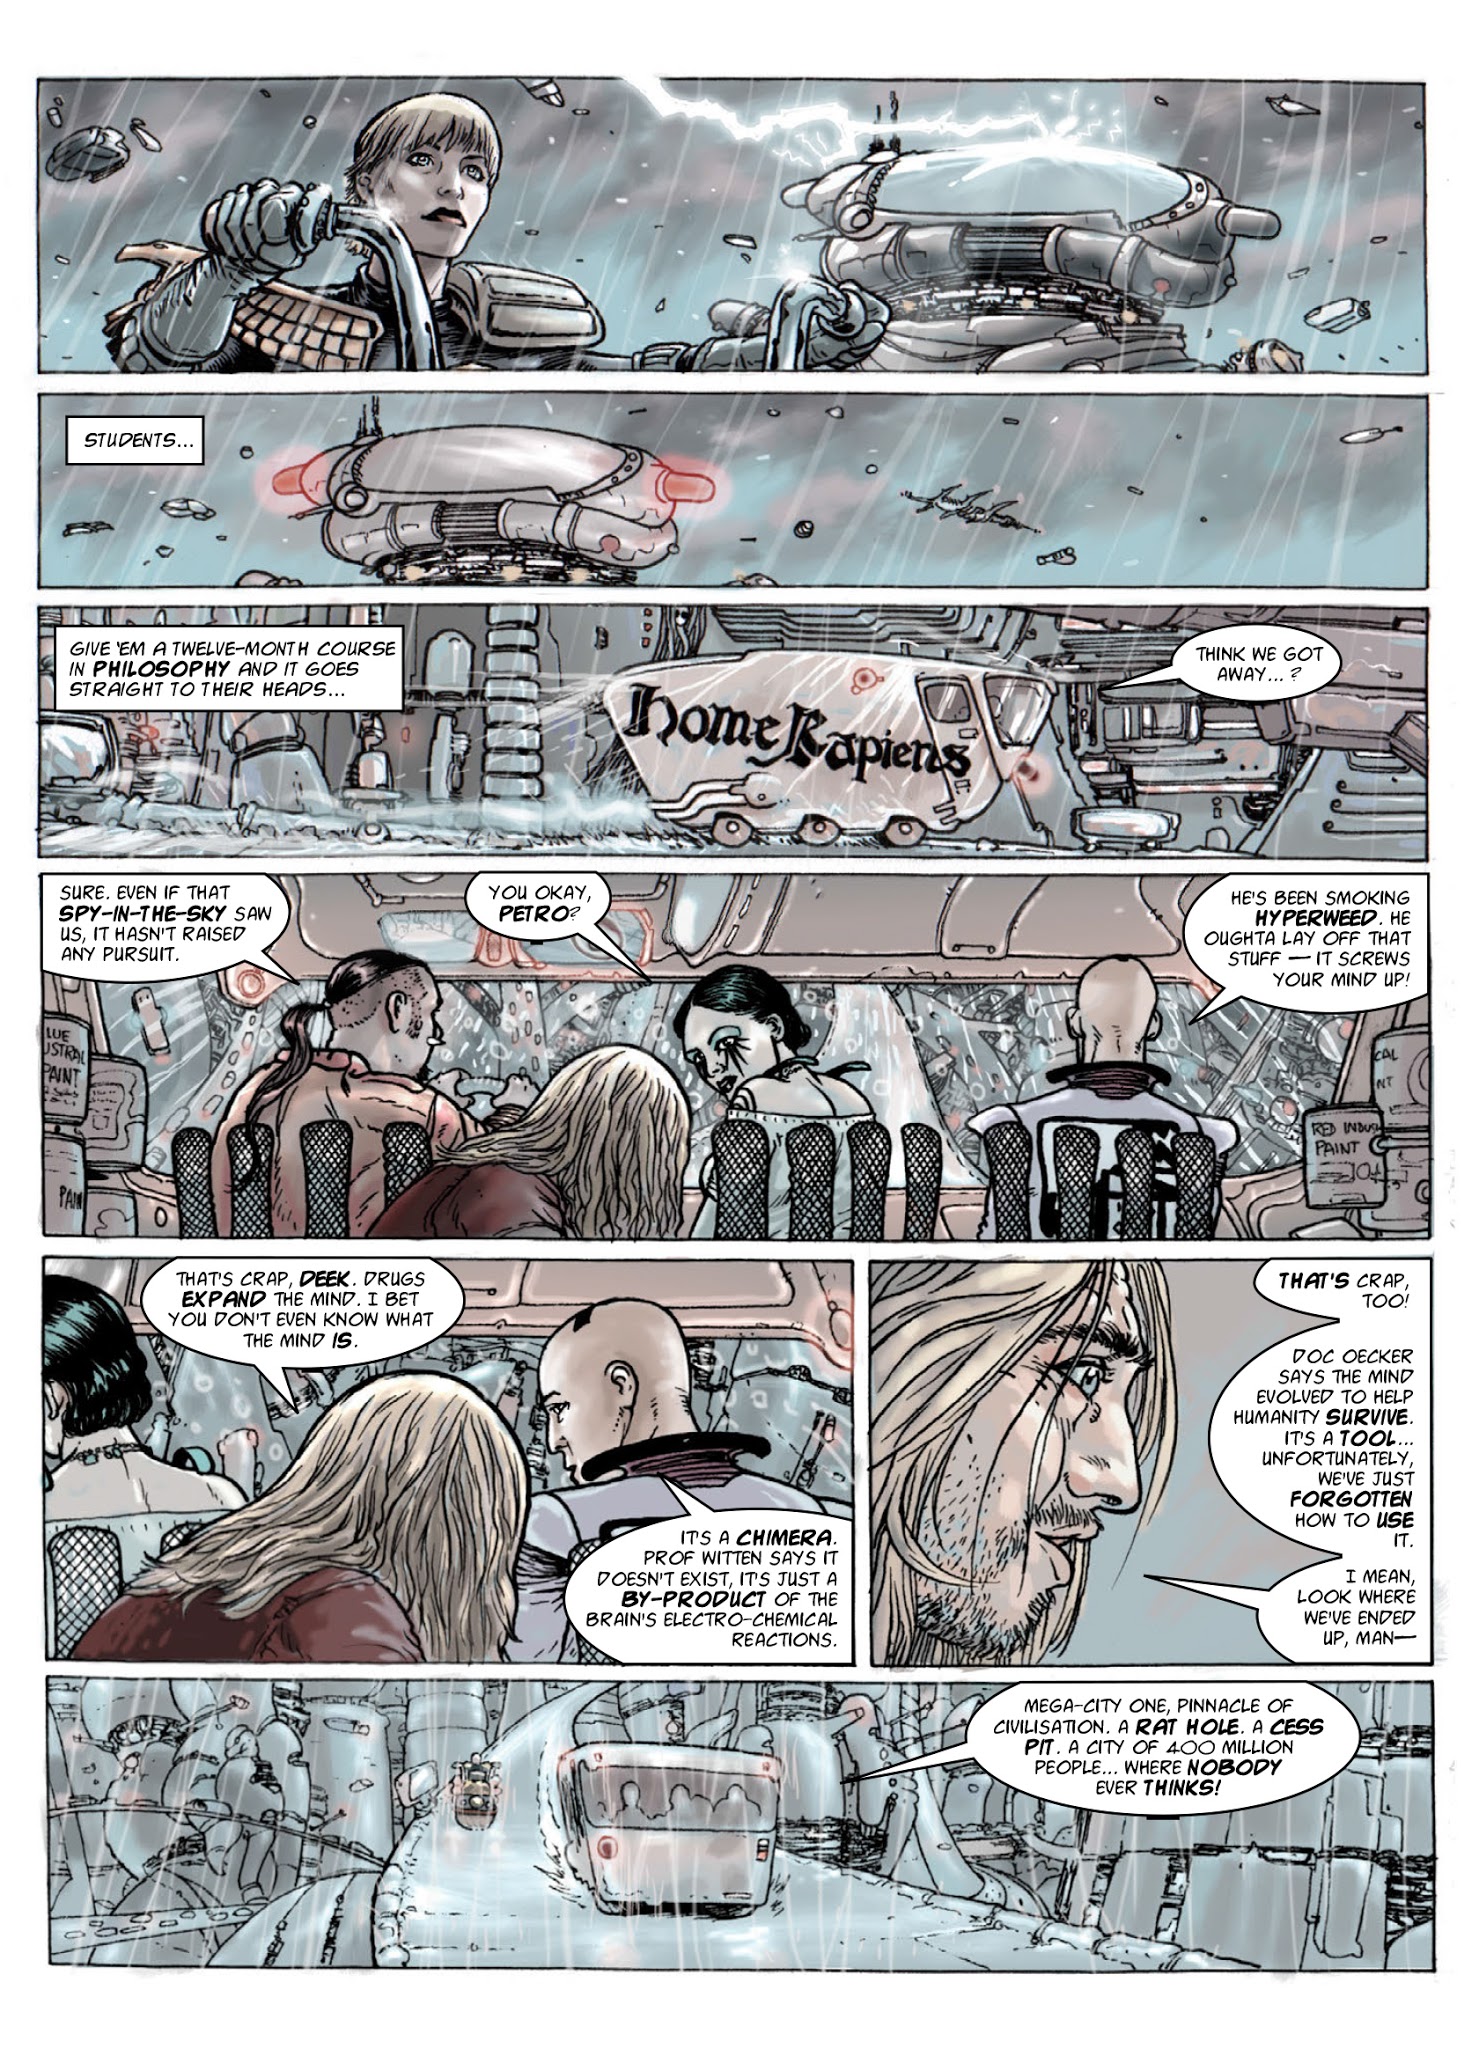 Read online Judge Anderson: The Psi Files comic -  Issue # TPB 5 - 37